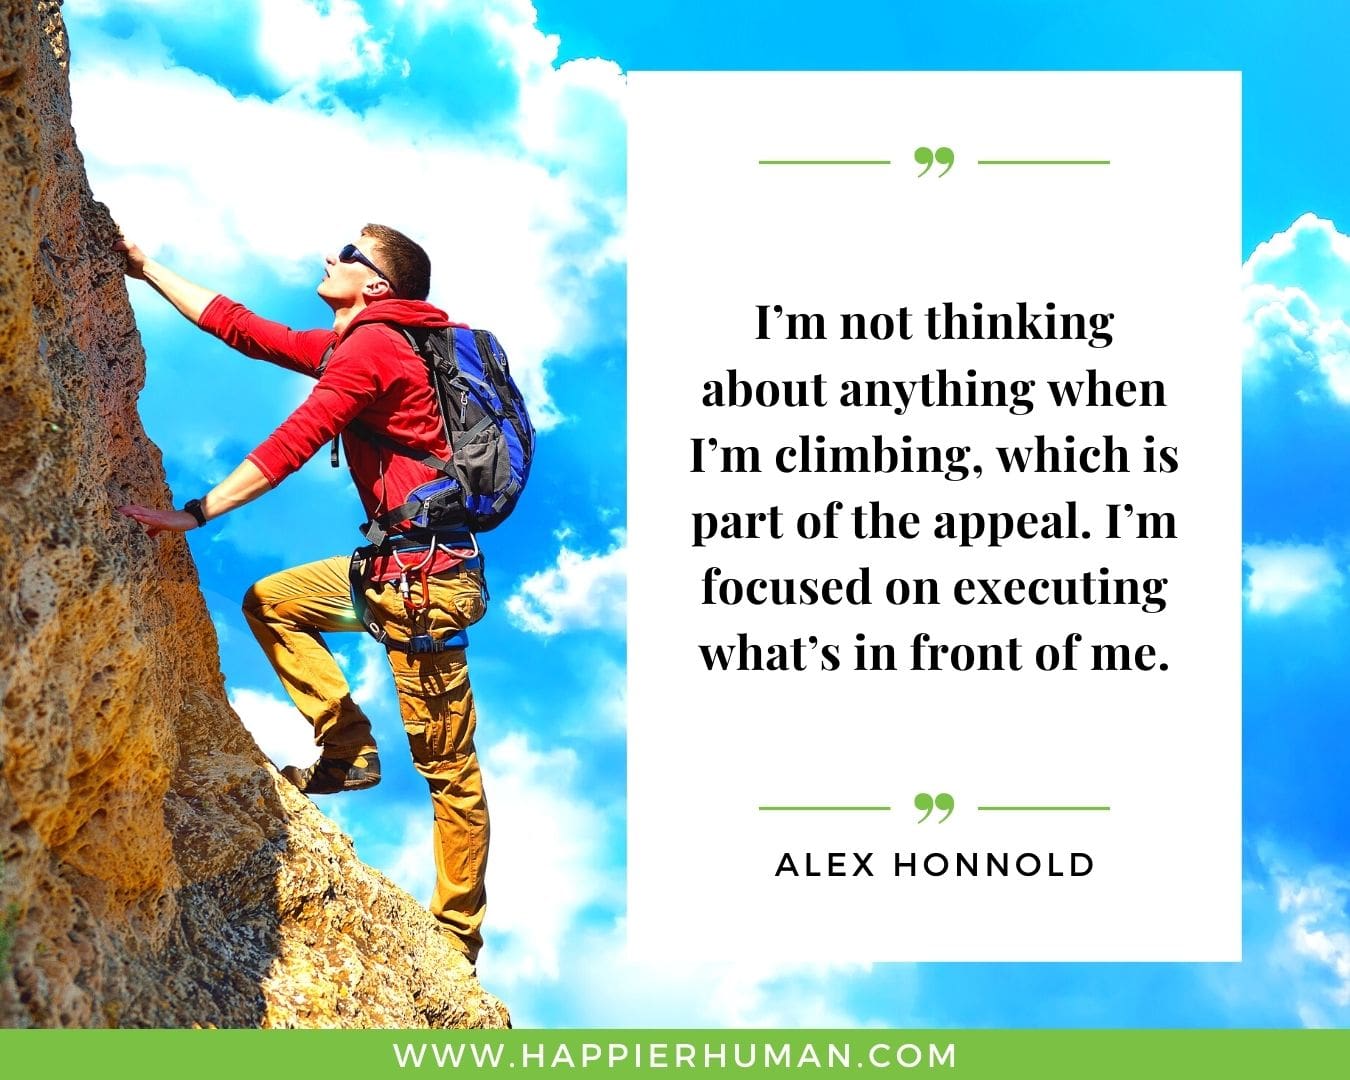 Overthinking Quotes - “I’m not thinking about anything when I’m climbing, which is part of the appeal. I’m focused on executing what’s in front of me.” - Alex Honnold